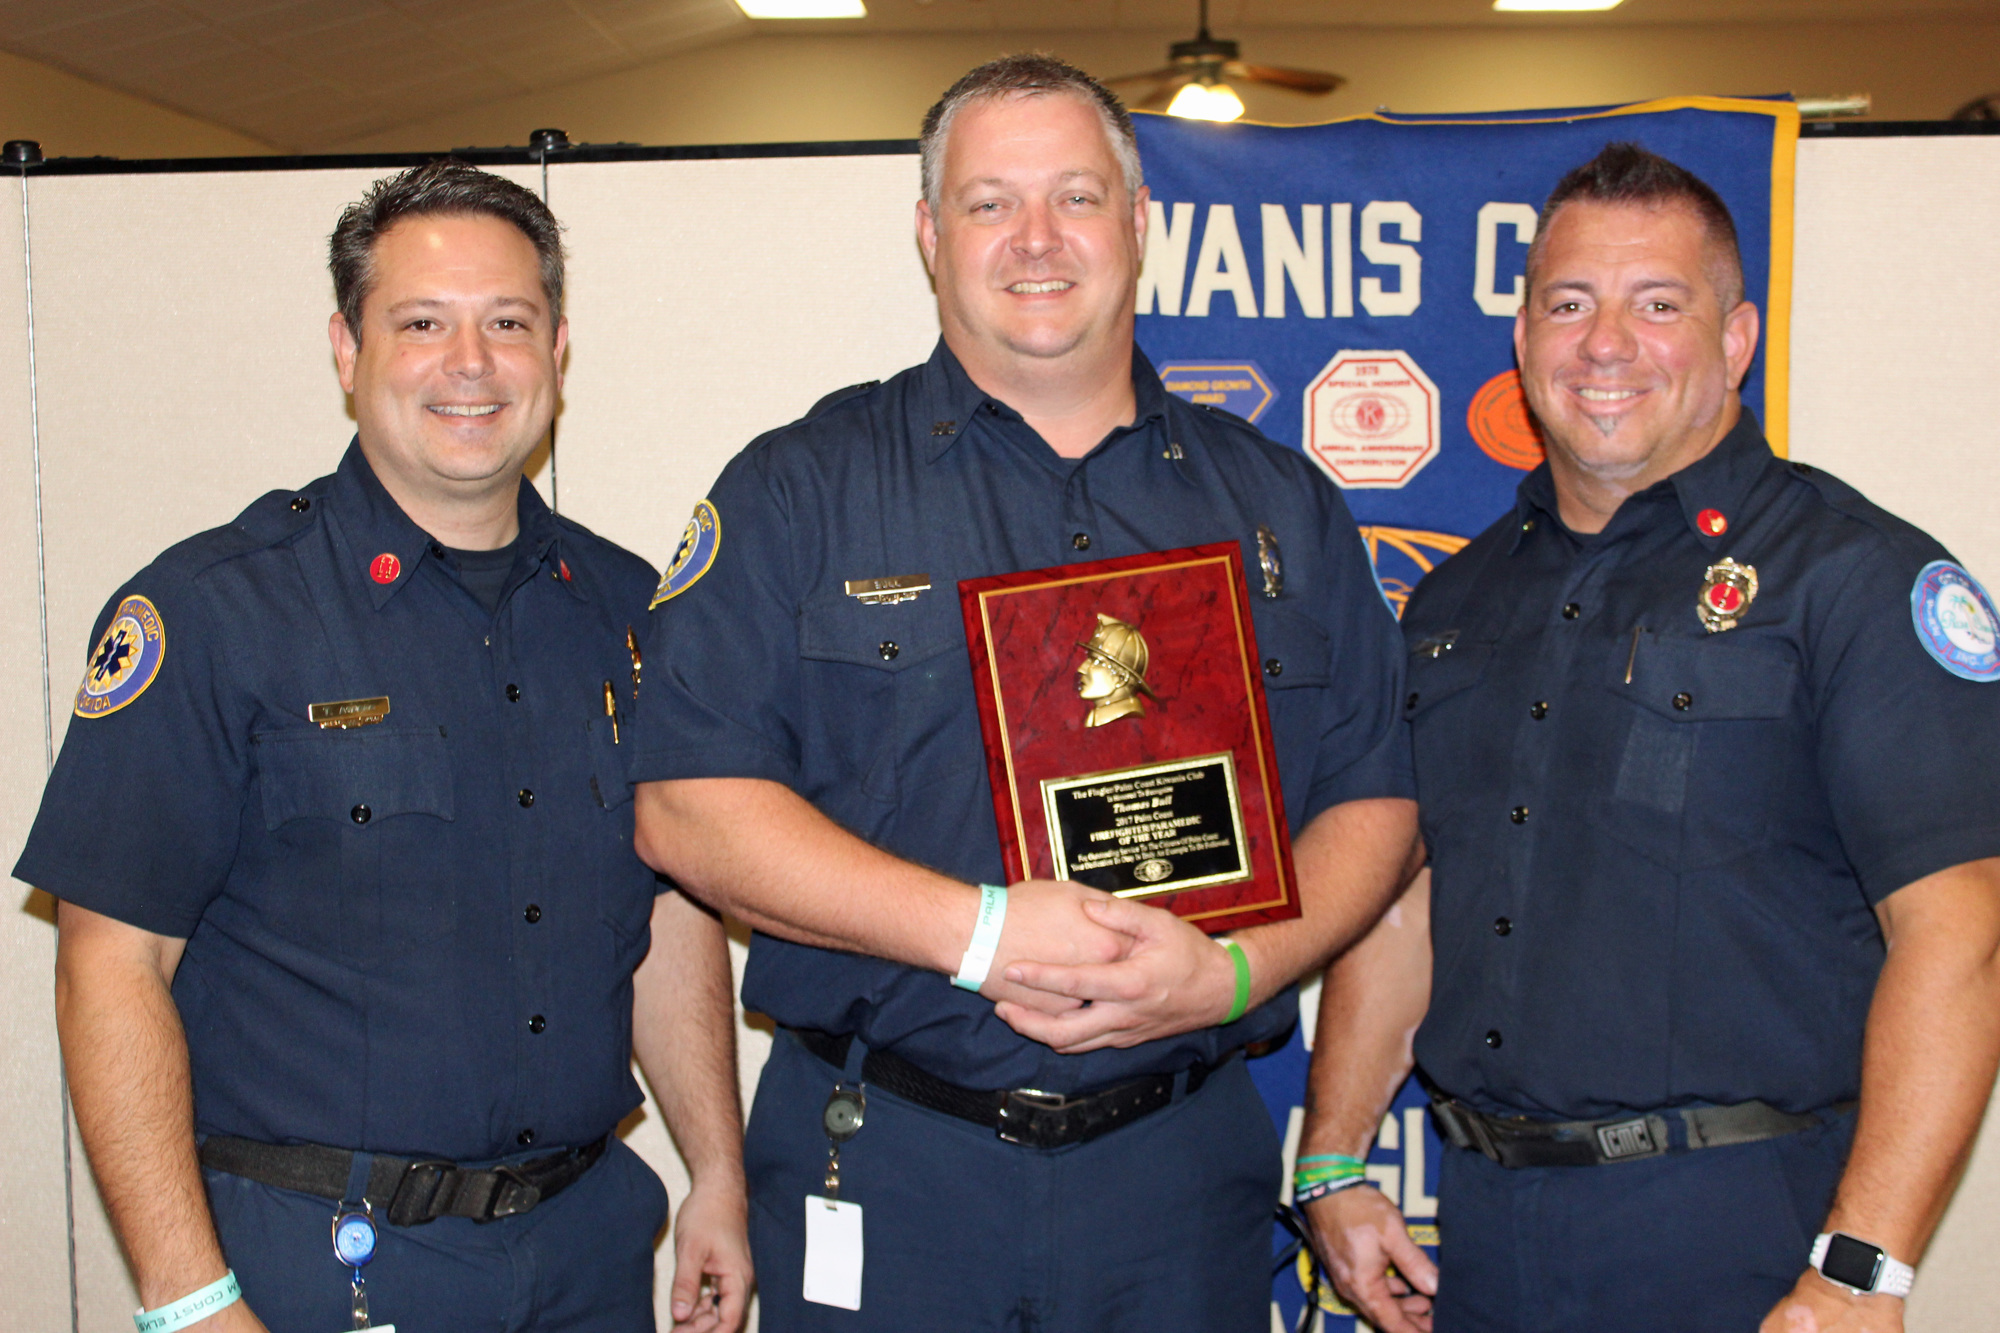 Palm Coast Firefighter-Paramedic Thomas Bull (center) is congratulated for selection as the Flagler-Palm Coast Kiwanis Club’s 2017 Firefighter of the Year by Capt. Thomas Ascone and Lt. Jeffrey Poeira. Photo courtesy of Cindi Lane